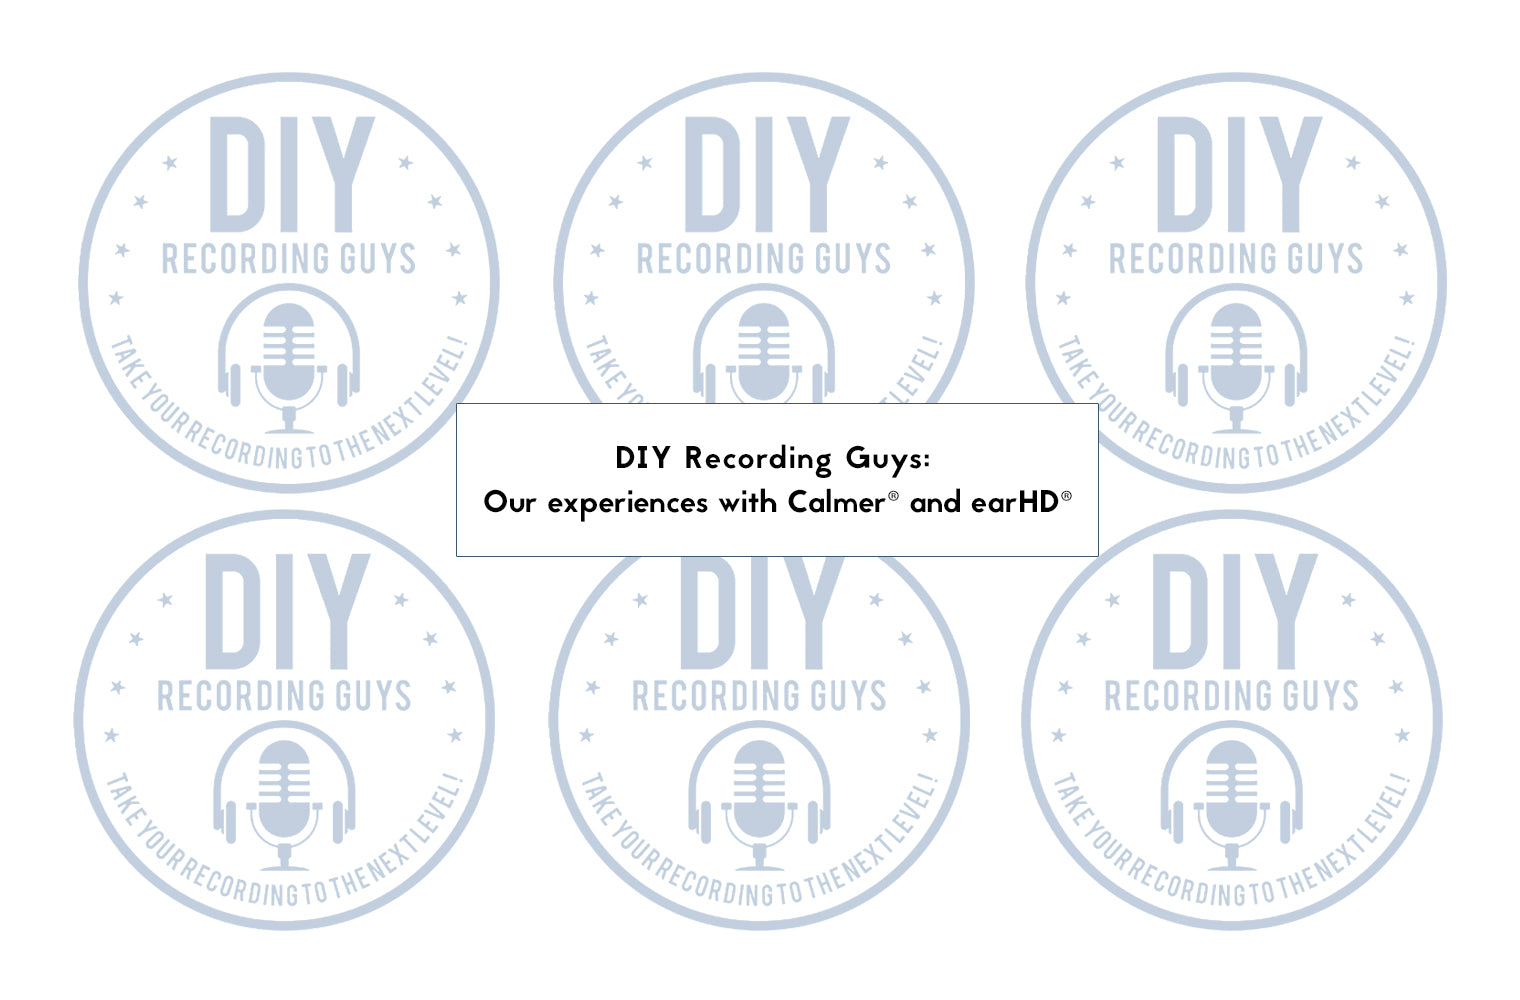 DIY Recording Guys: Our experiences with Flare’s Calmer® and earHD®